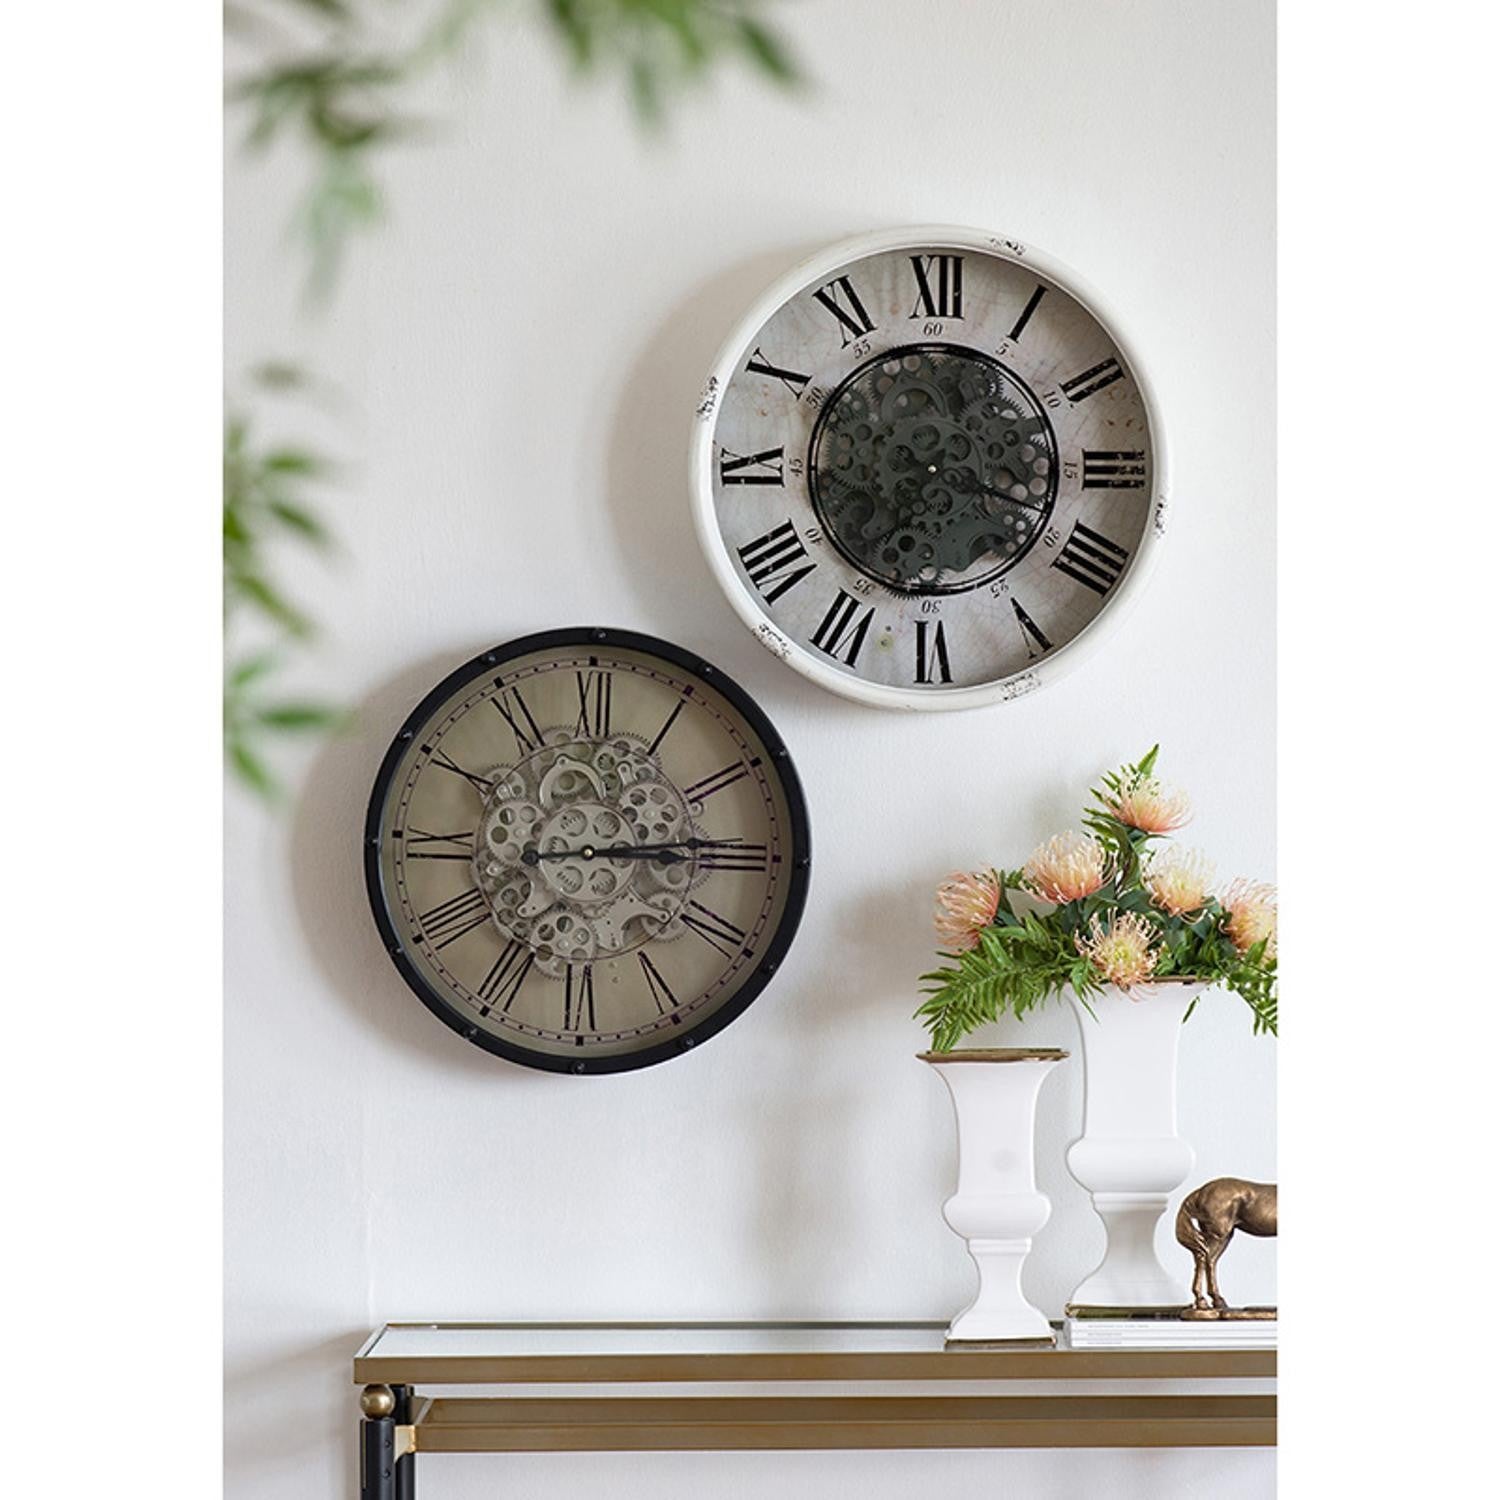 18" Black and Ivory Vintage Gear Industrial Wall Clock